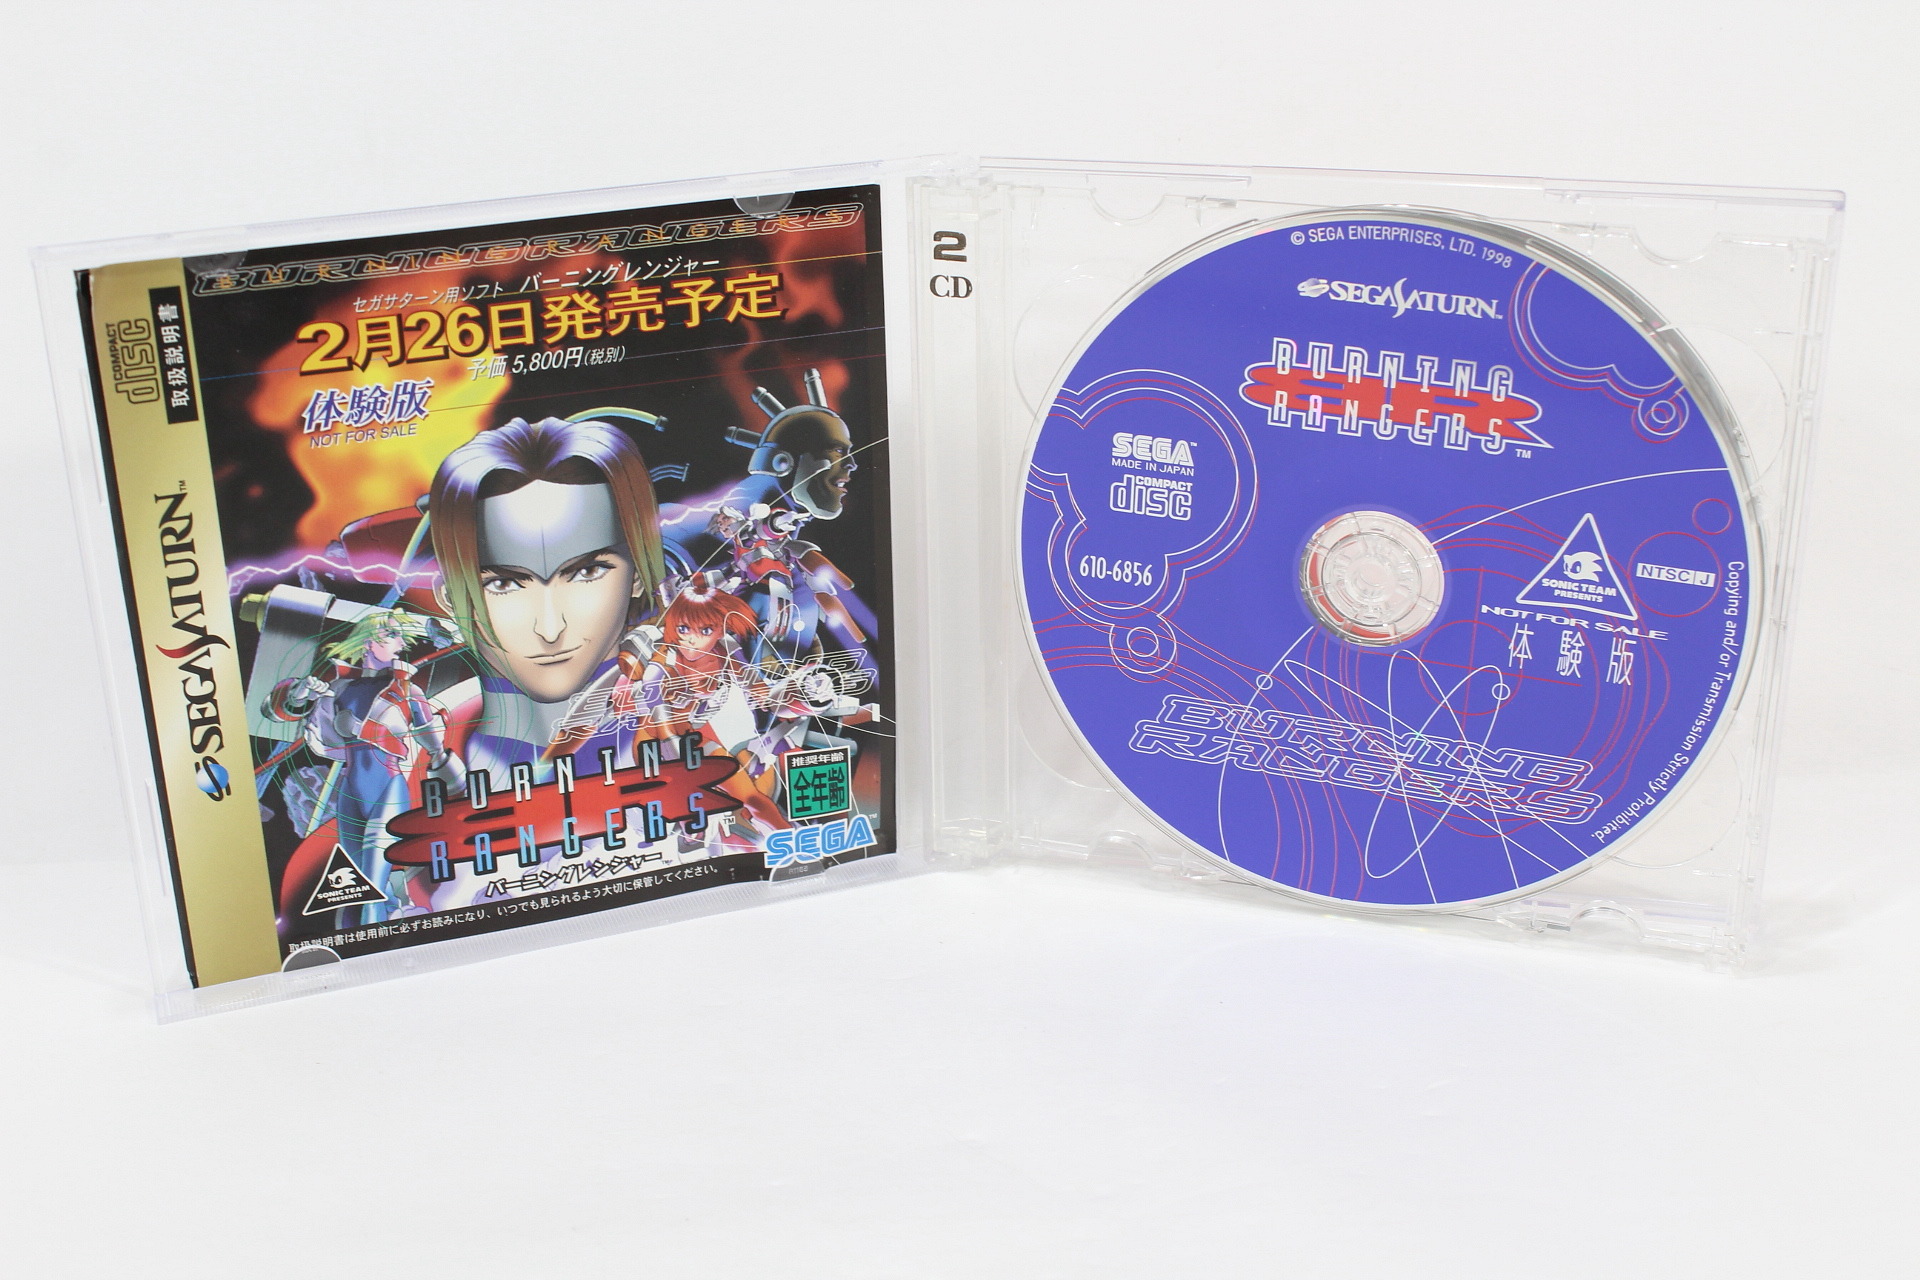 The House of the Dead / Burning Rangers Demo Disc SS (B)